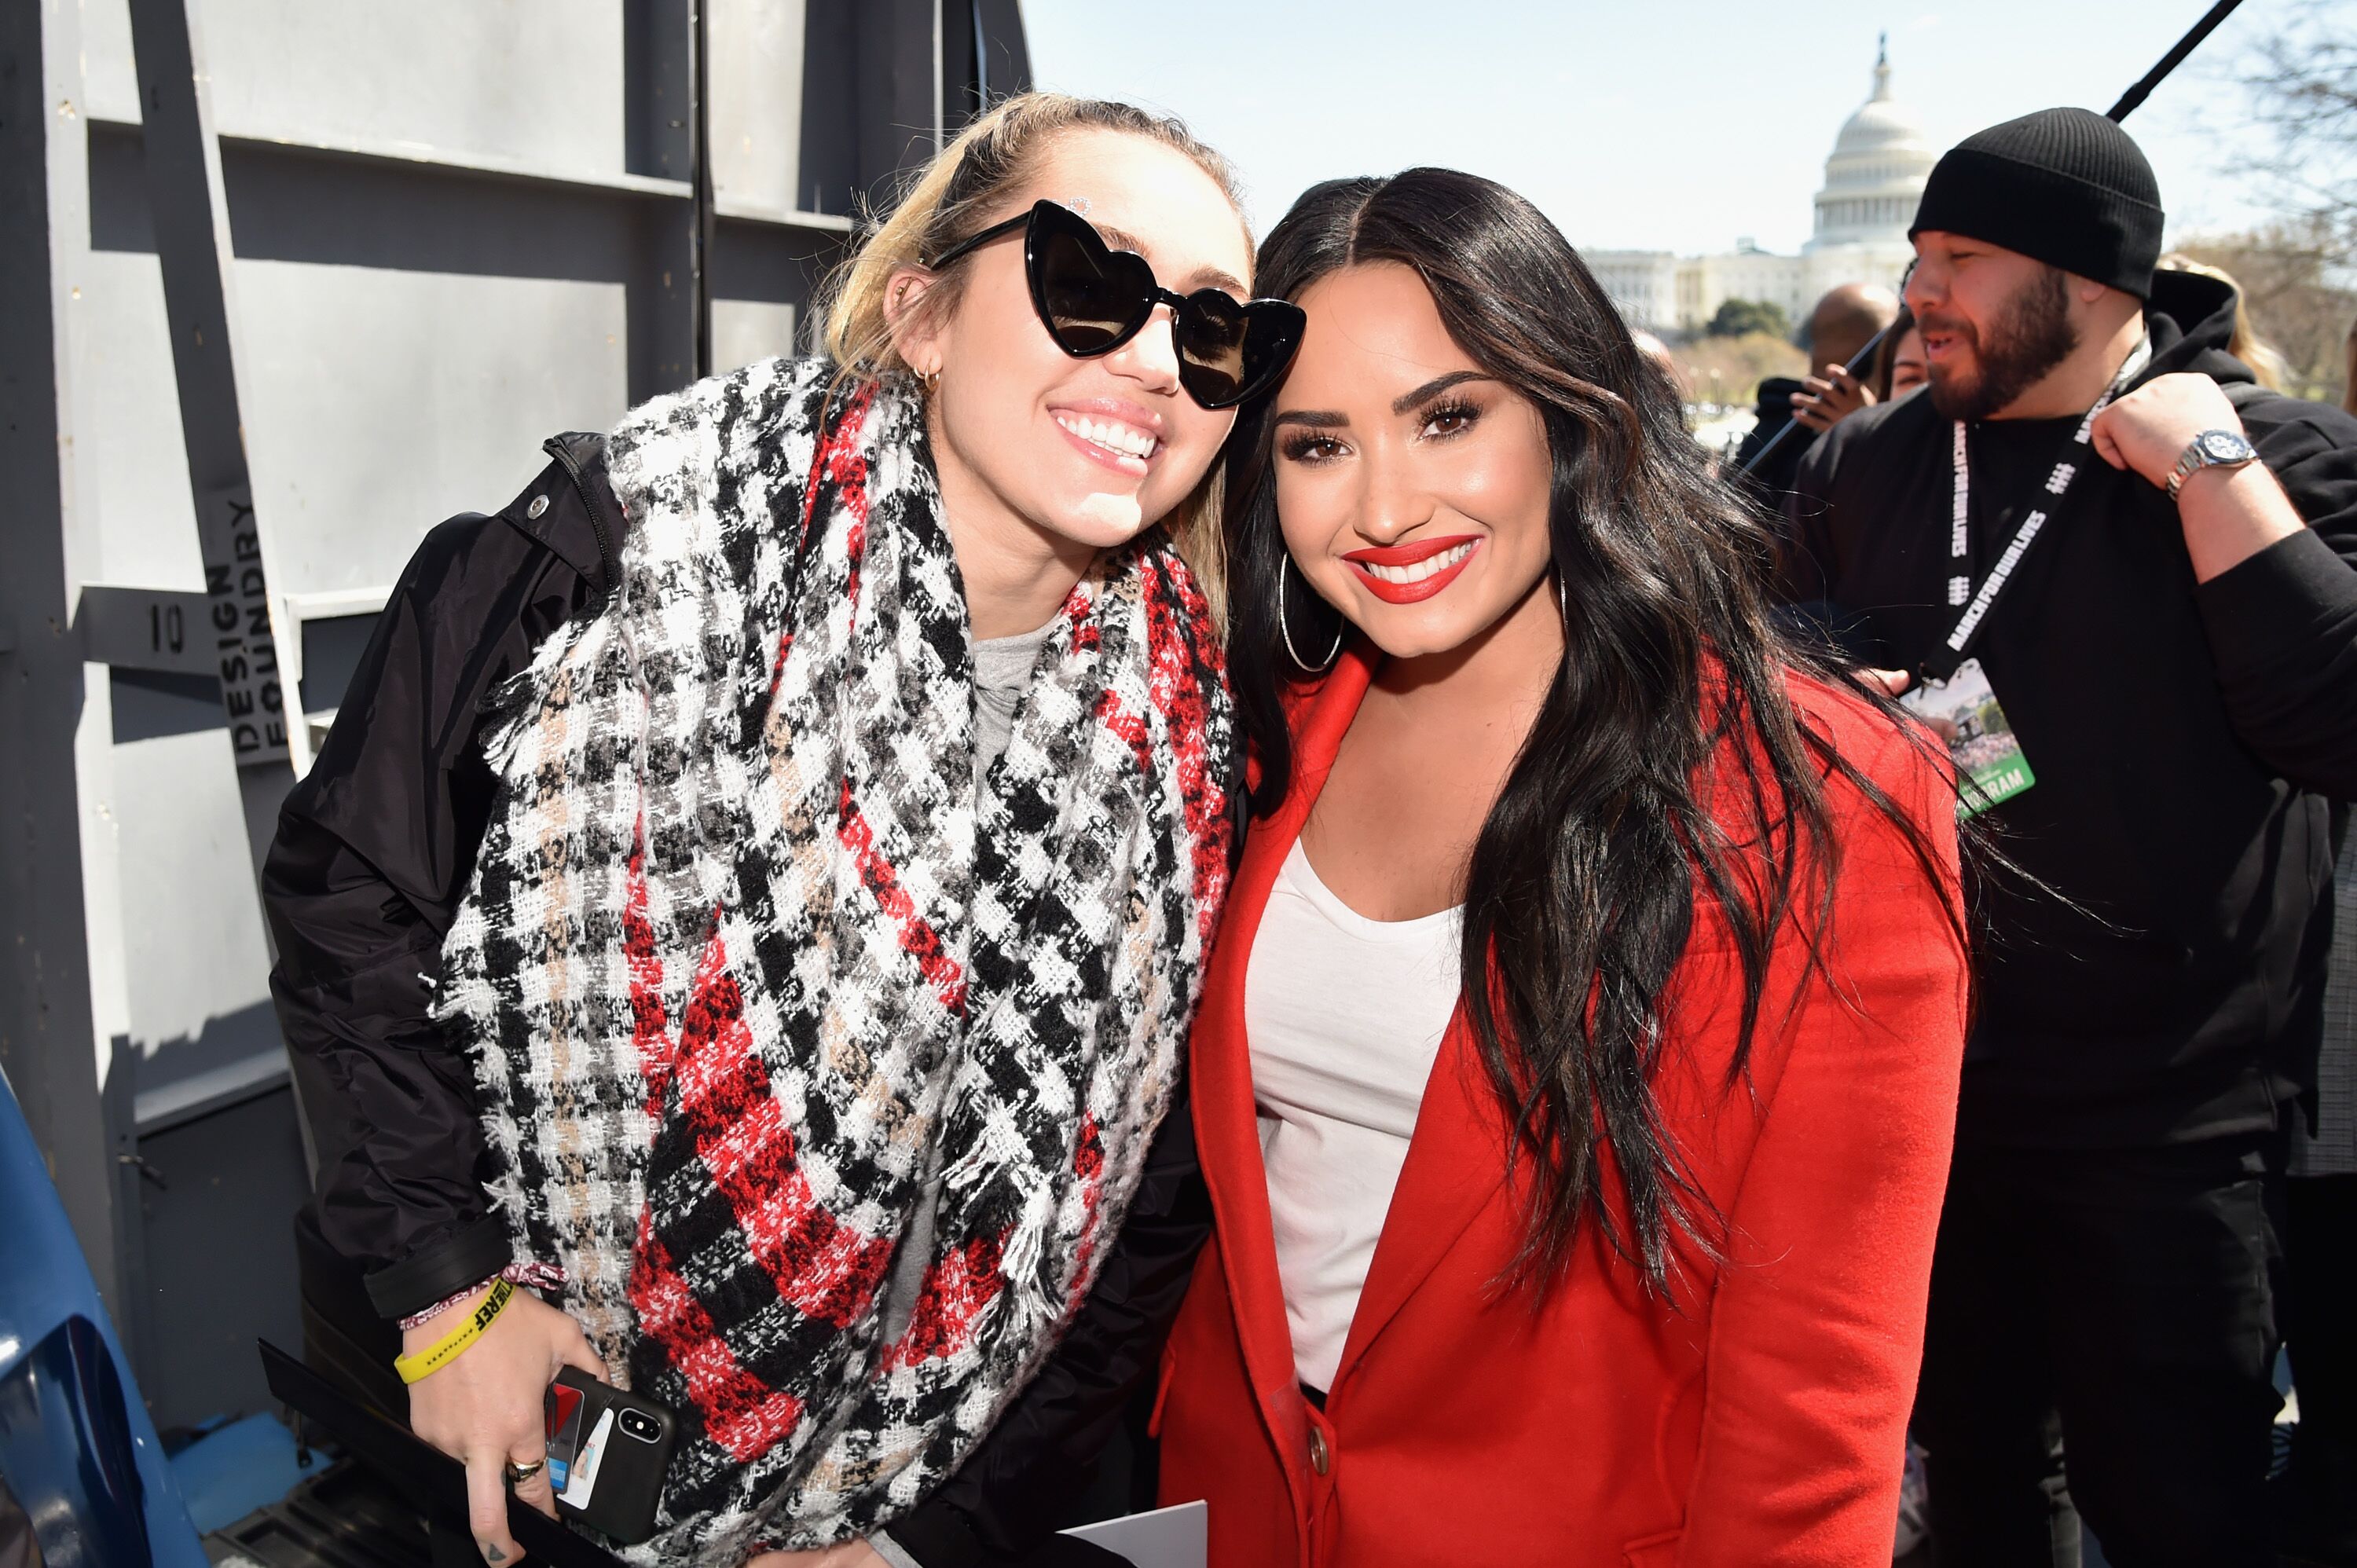 Miley Cyrus and Demi Lovato attend March For Our Lives on March 24, 2018 in Washington, DC. | Source: Getty Images